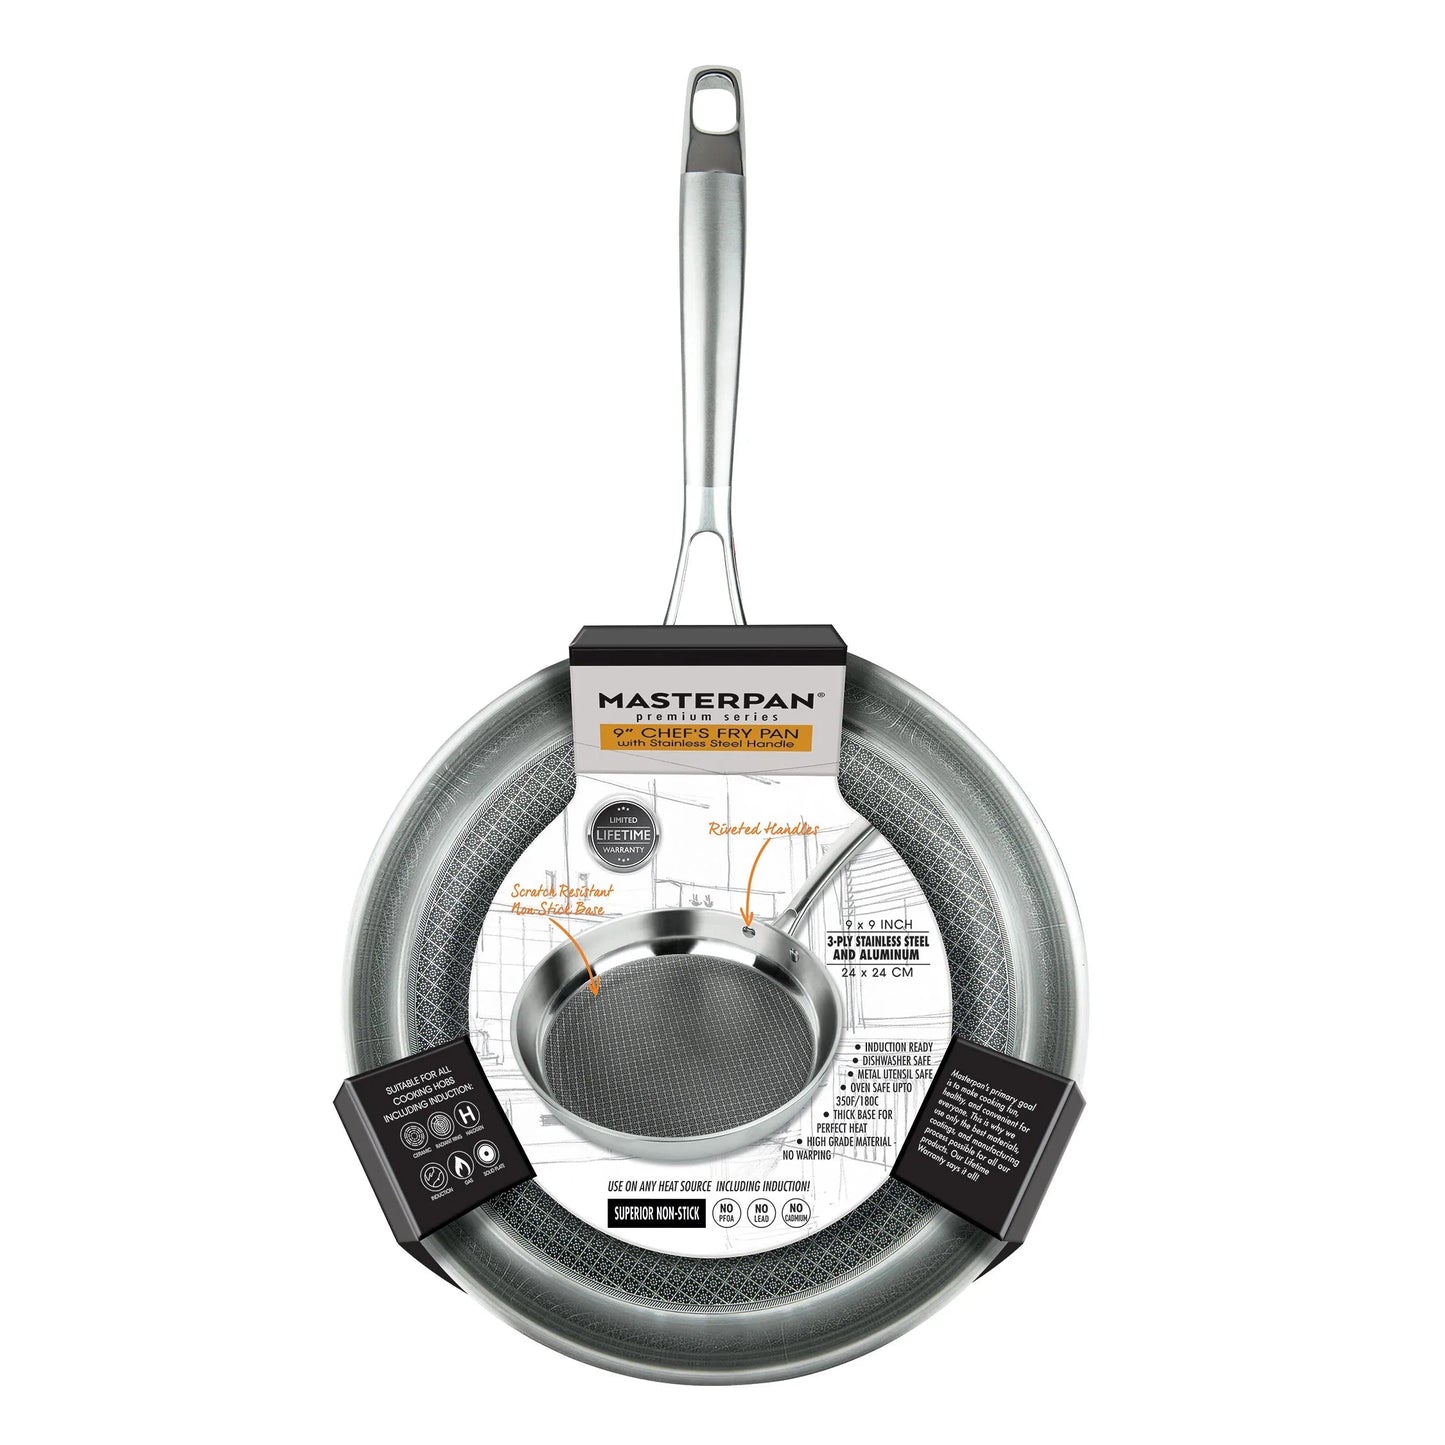 MASTERPAN Premium Series 9” 3-Ply Fry Pan and Skillet Stainless Steel and Aluminum Scratch-Resistant